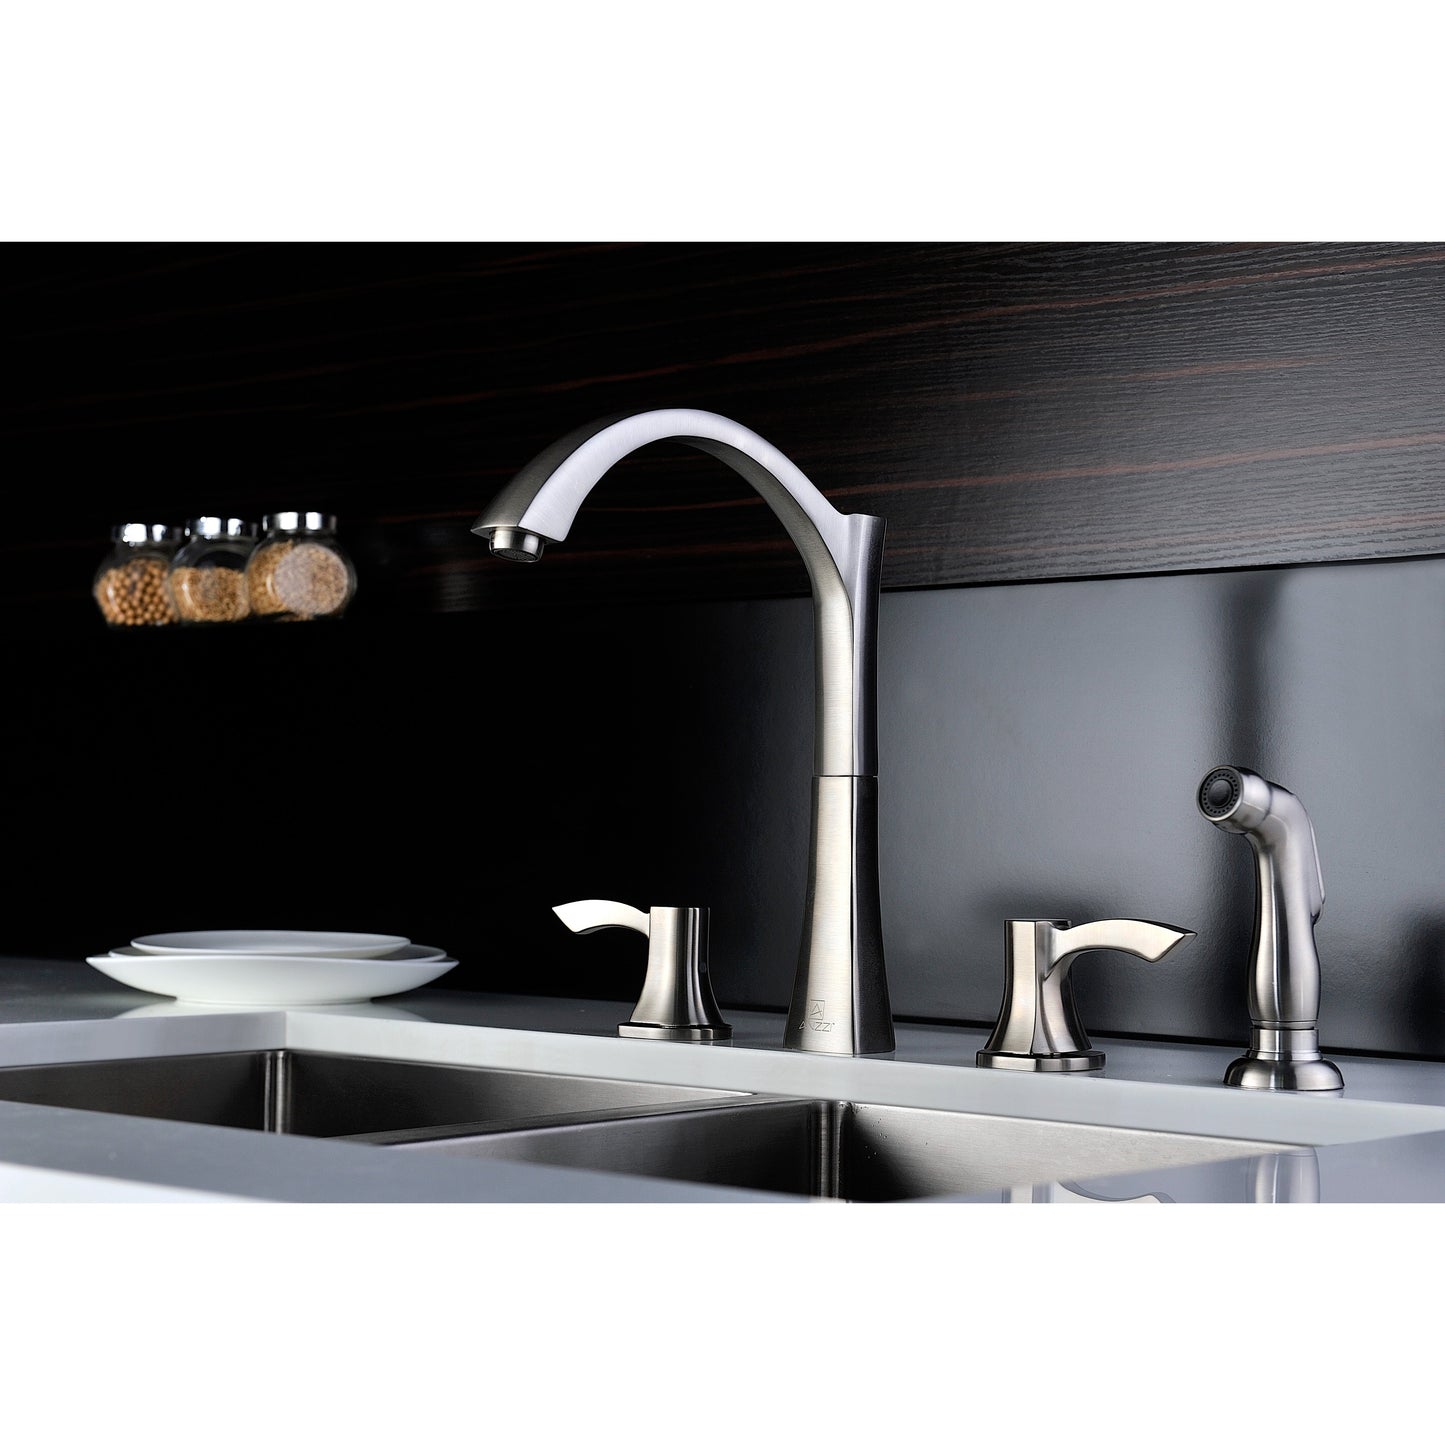 ANZZI Soave Series Double Hole Brushed Nickel Kitchen Faucet With Euro-Grip Pull Out Sprayer and 360-Degree Turning Spout